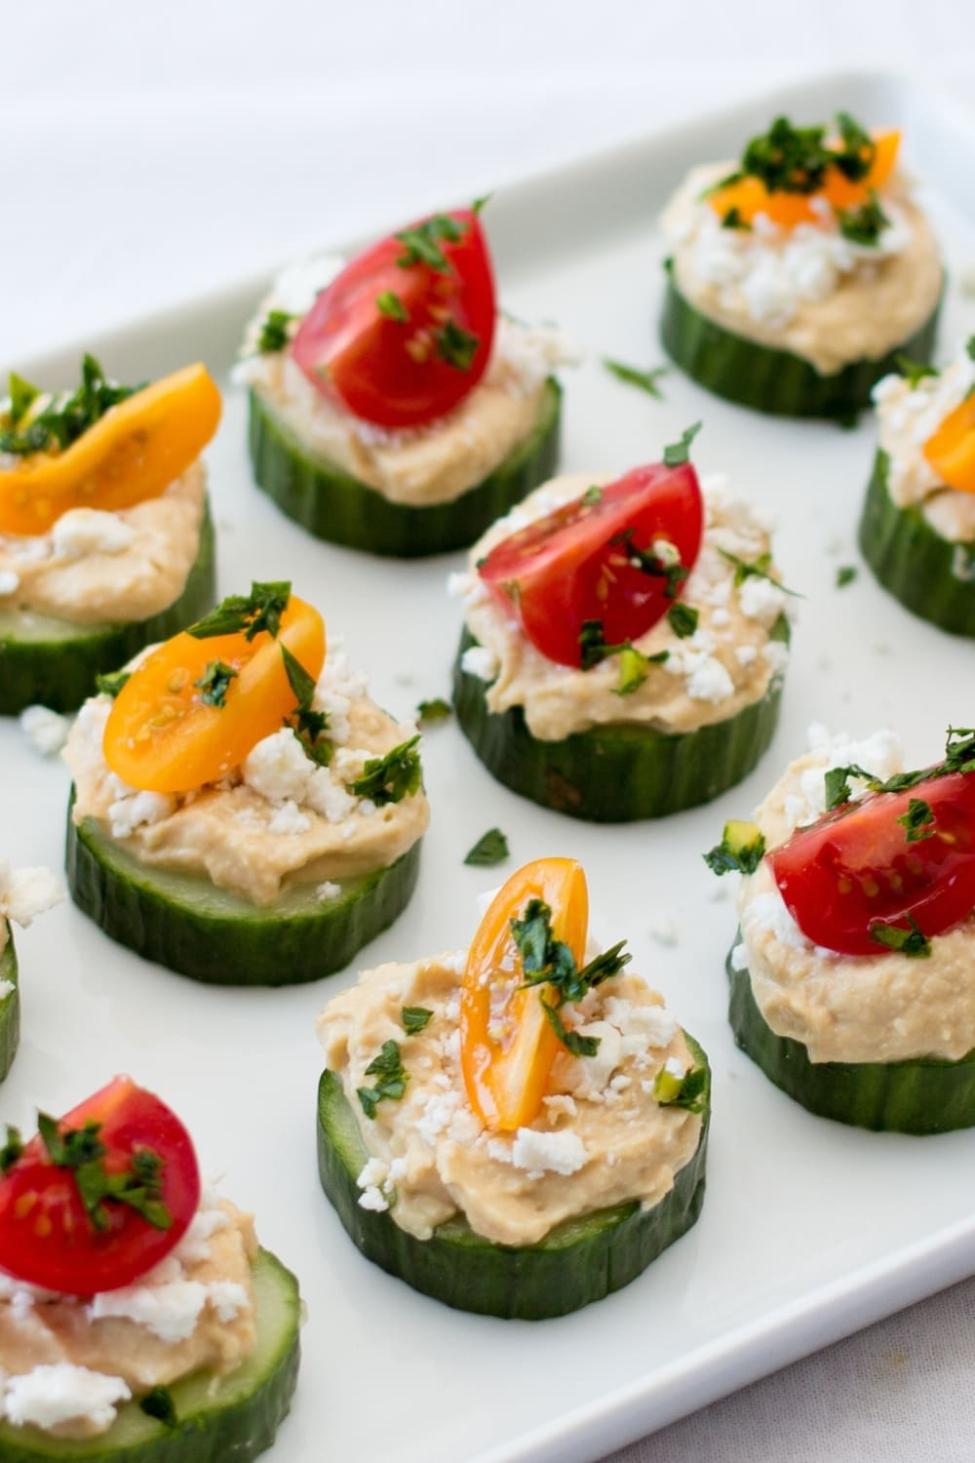 How Can I Make Appetizers That Are Perfect for a Special Occasion?